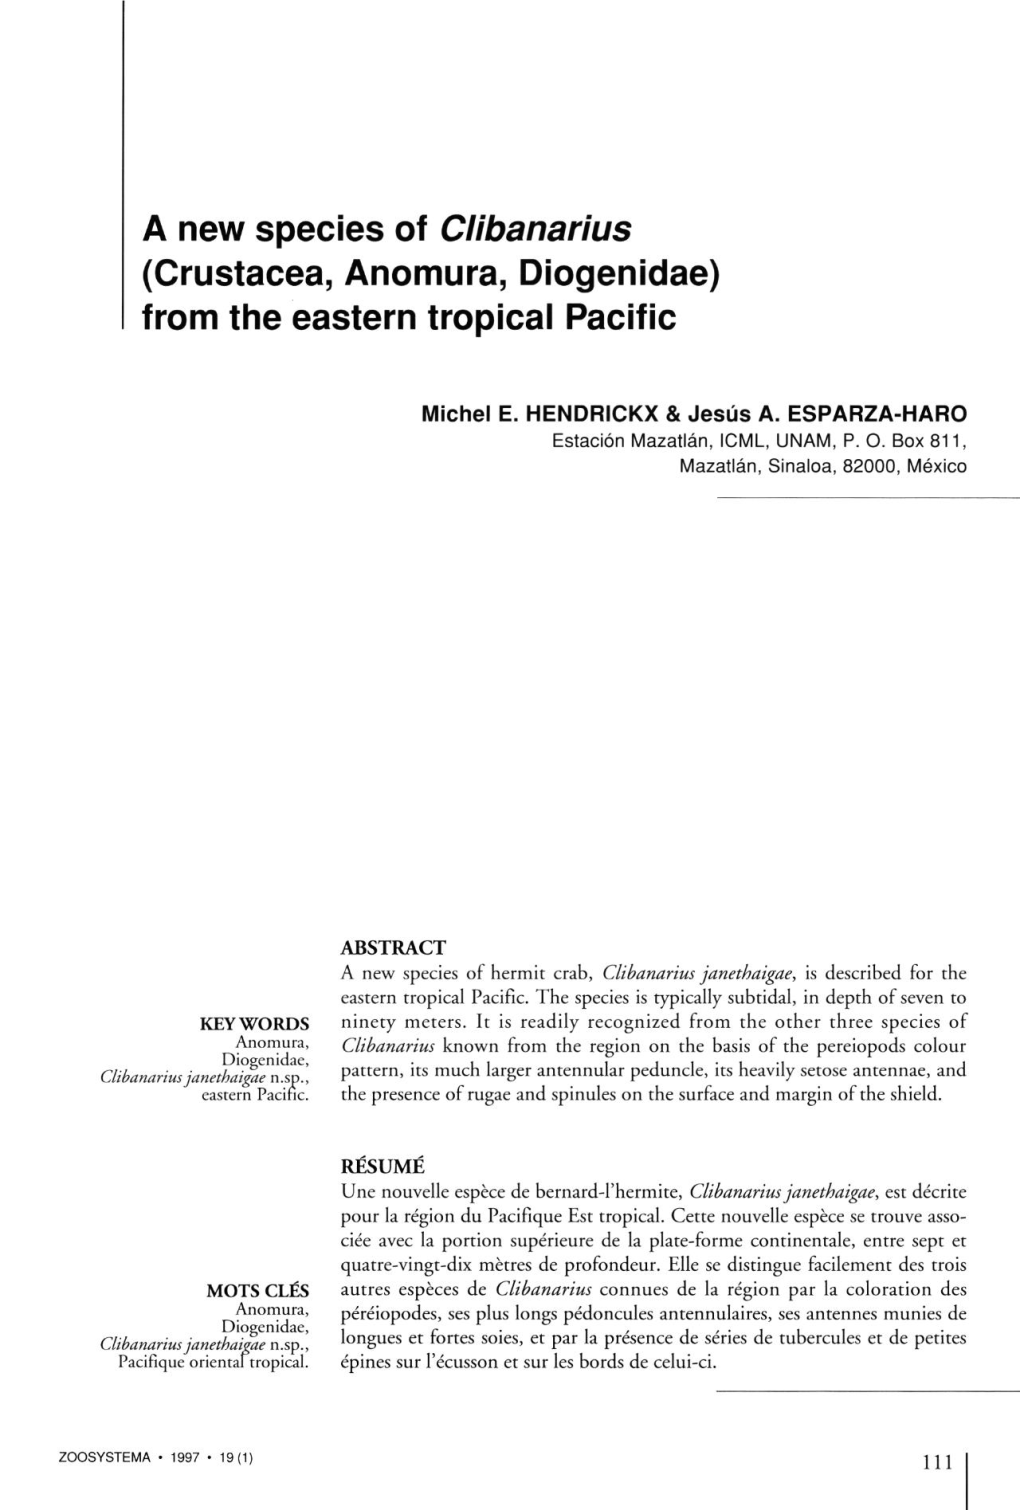 A New Species of Clibanarius (Crustacea, Anomura, Diogenidae) from the Eastern Tropical Pacific